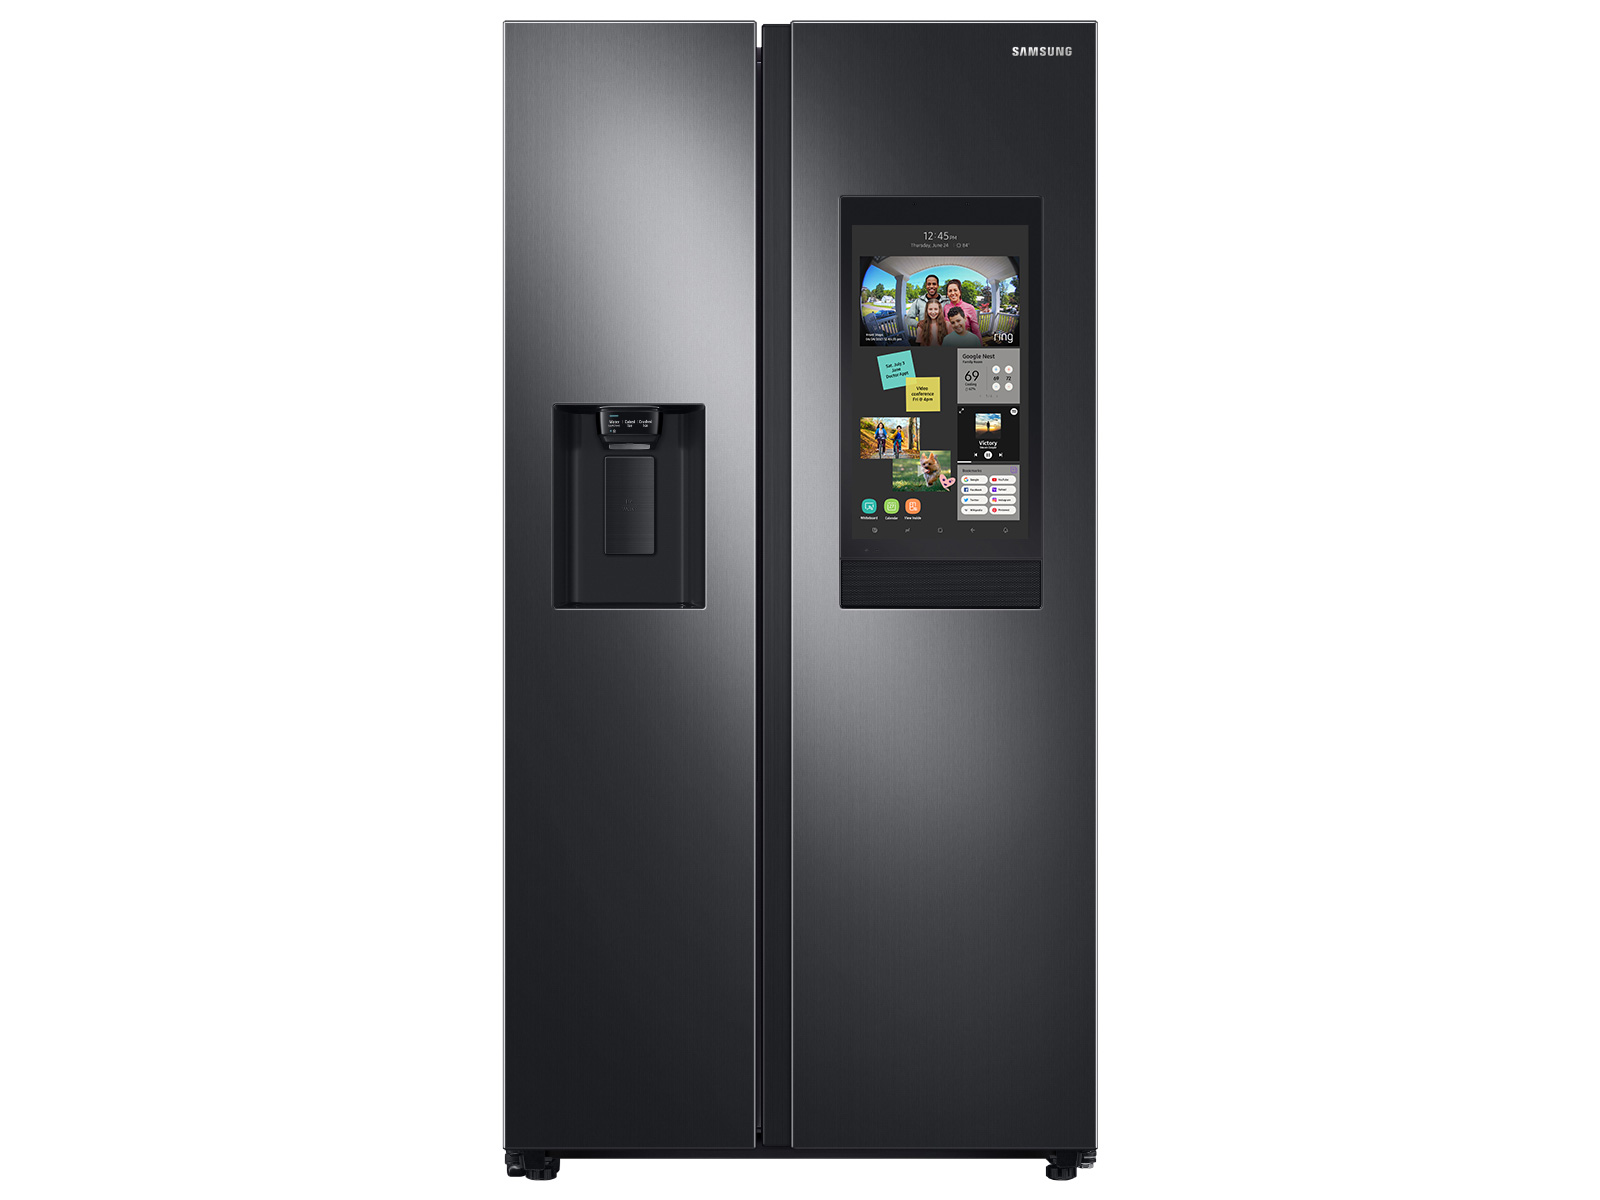 Black Stainless Steel 26.7 cu. ft. Side by Side Fridge with FamilyHub |  Samsung US